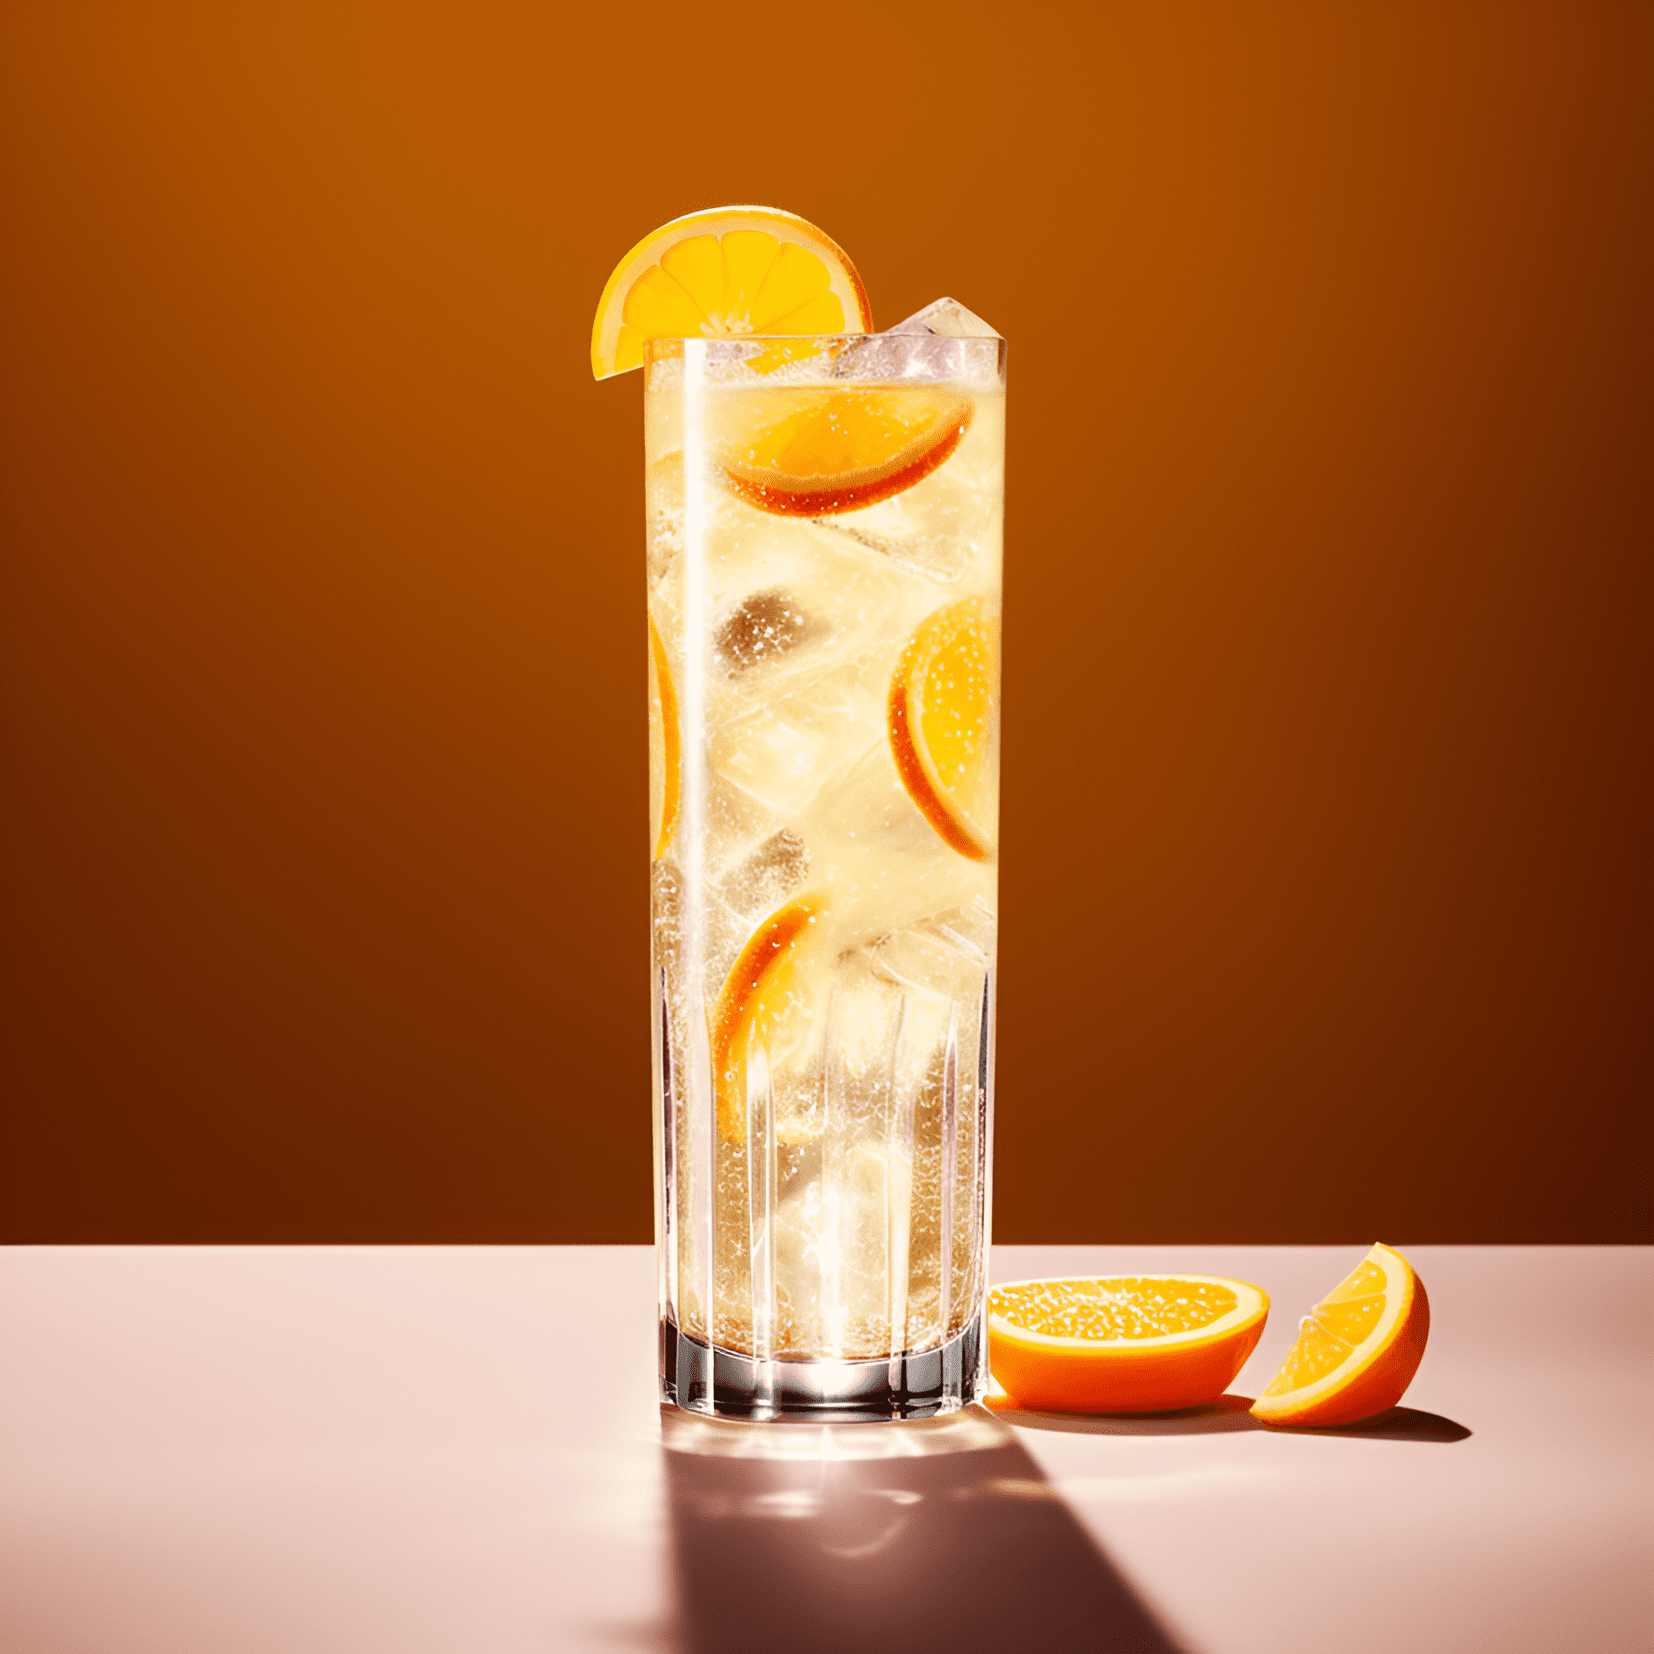 Cointreau Fizz Cocktail Recipe - The Cointreau Fizz is a light, refreshing, and slightly sweet cocktail with a hint of tartness from the lime juice. The effervescence from the soda water adds a pleasant fizziness, while the Cointreau provides a subtle orange flavor.